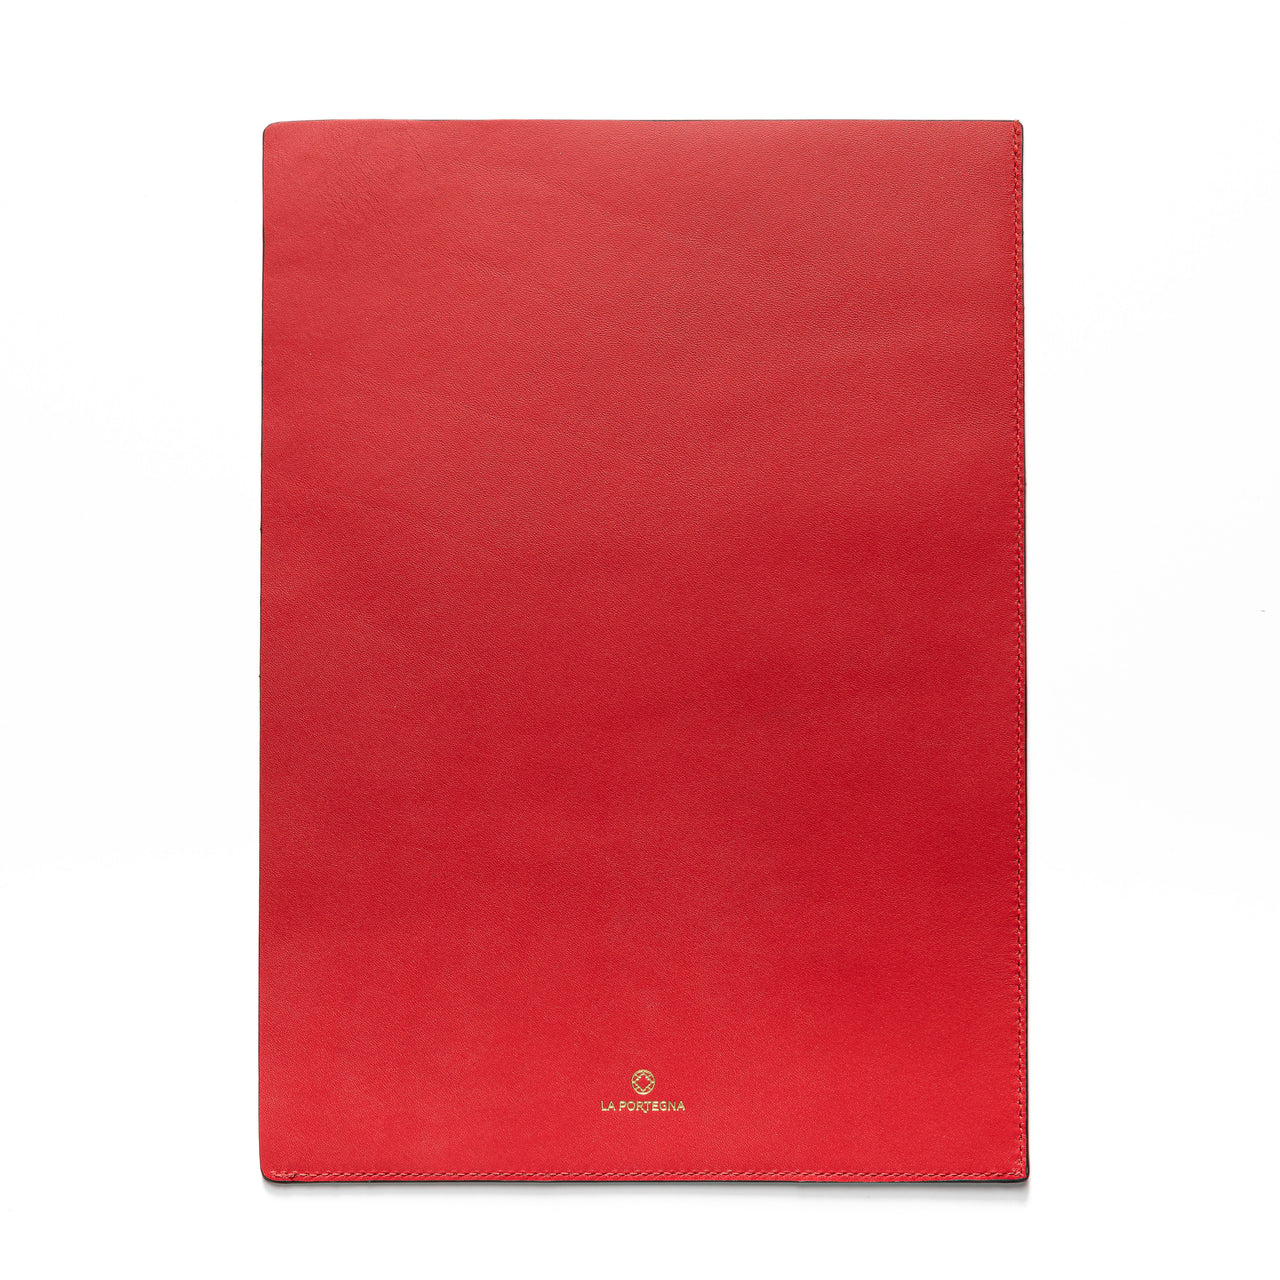 Red document case